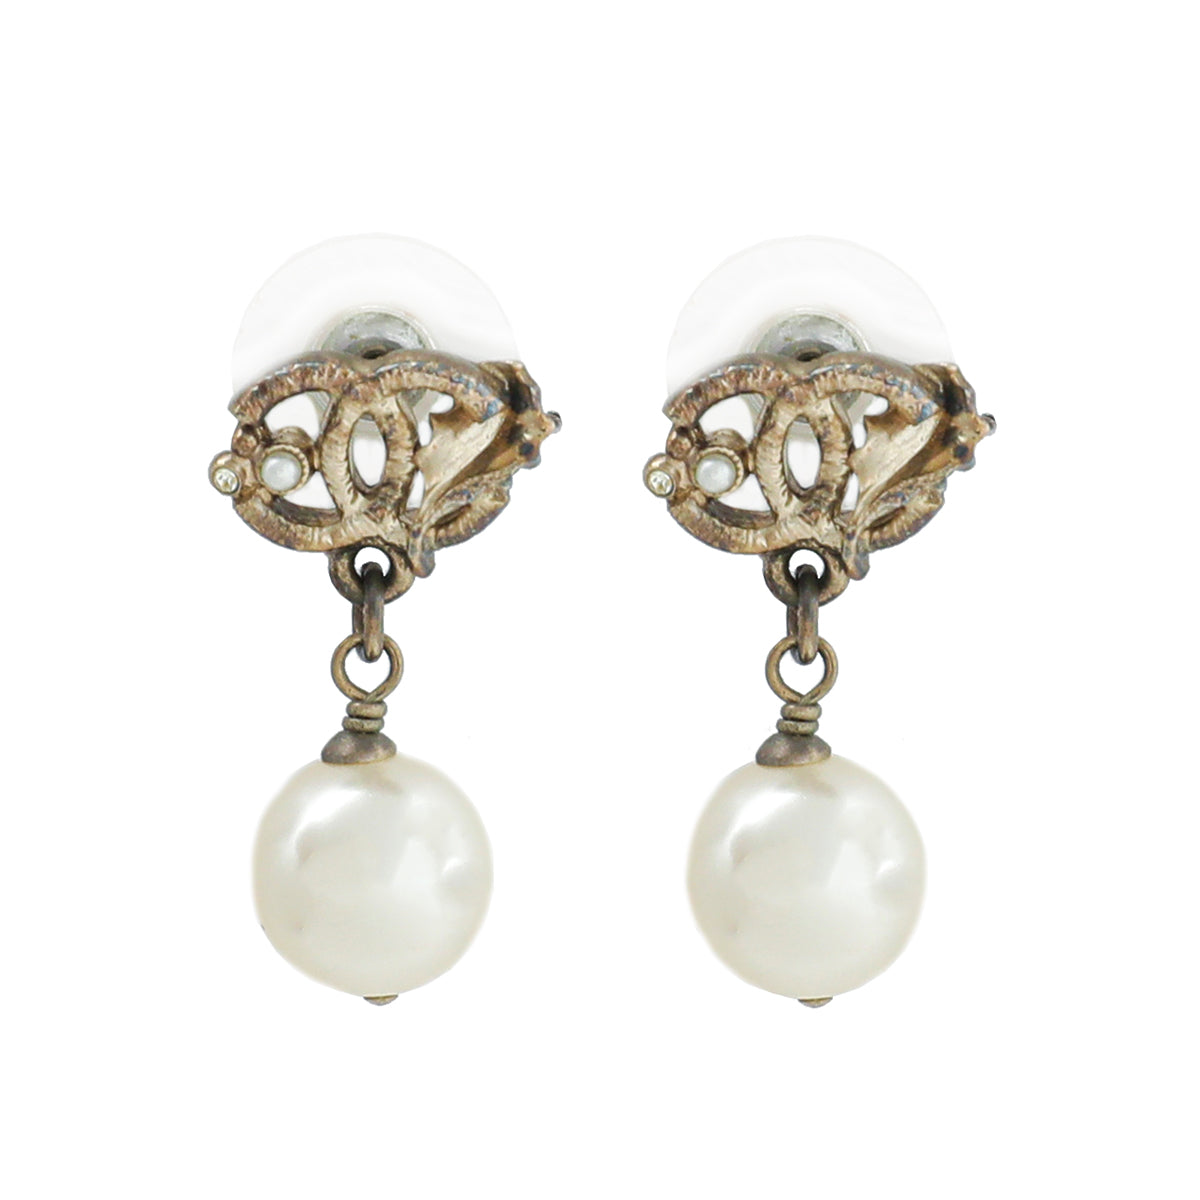 Chanel 15B Grey and Black Pearl Long Drop Earrings – I MISS YOU VINTAGE